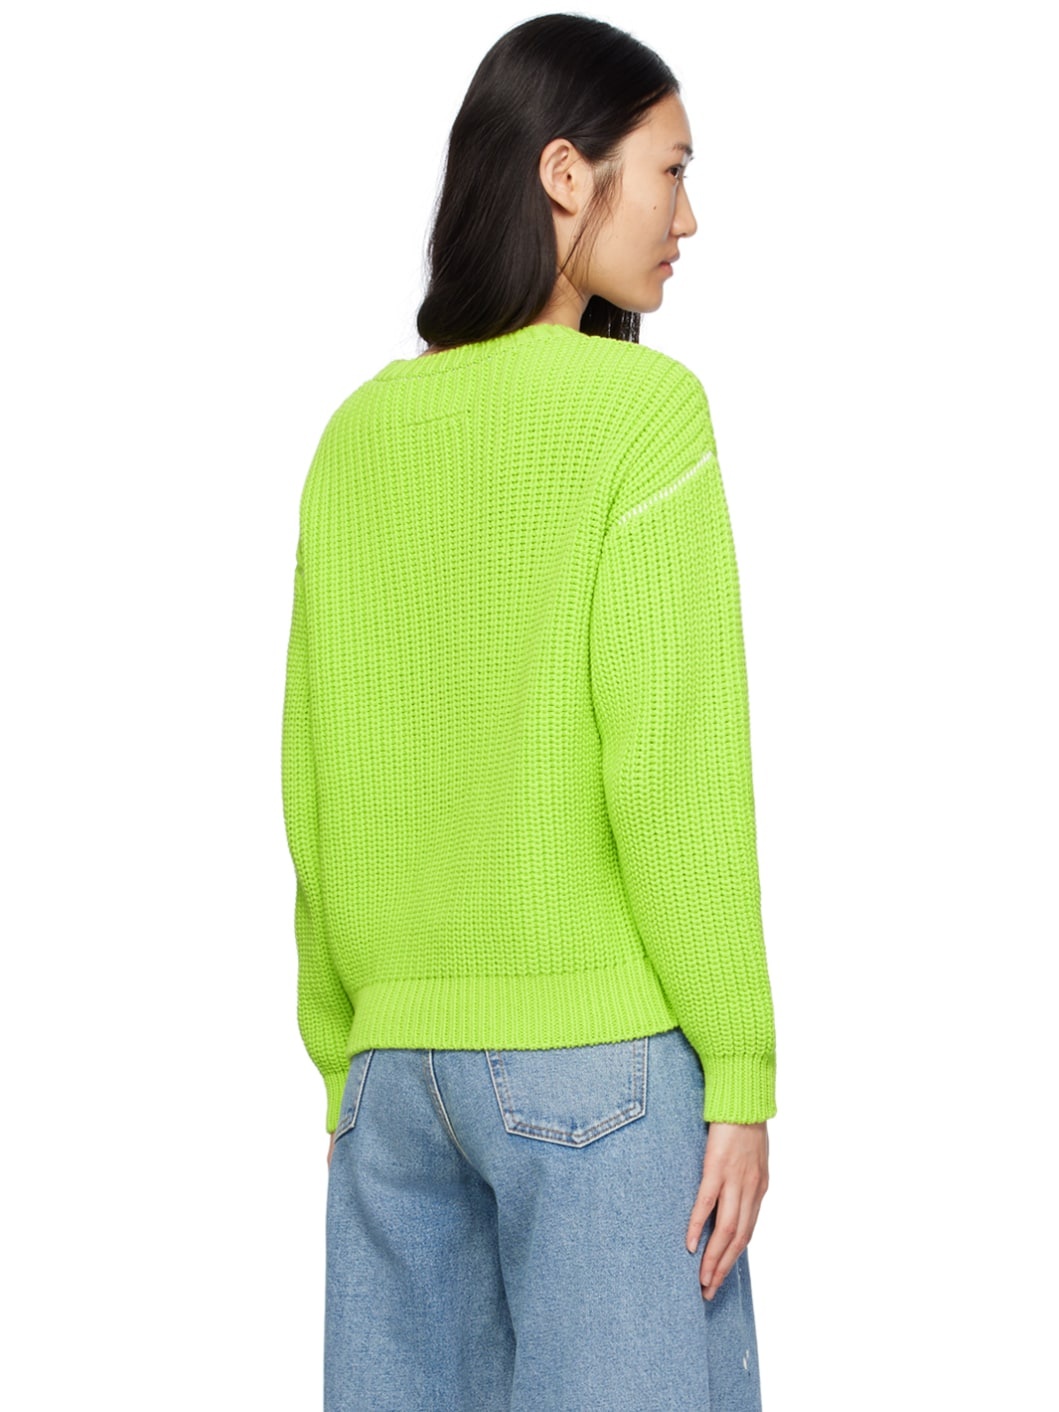 Green Airy Sweater - 3